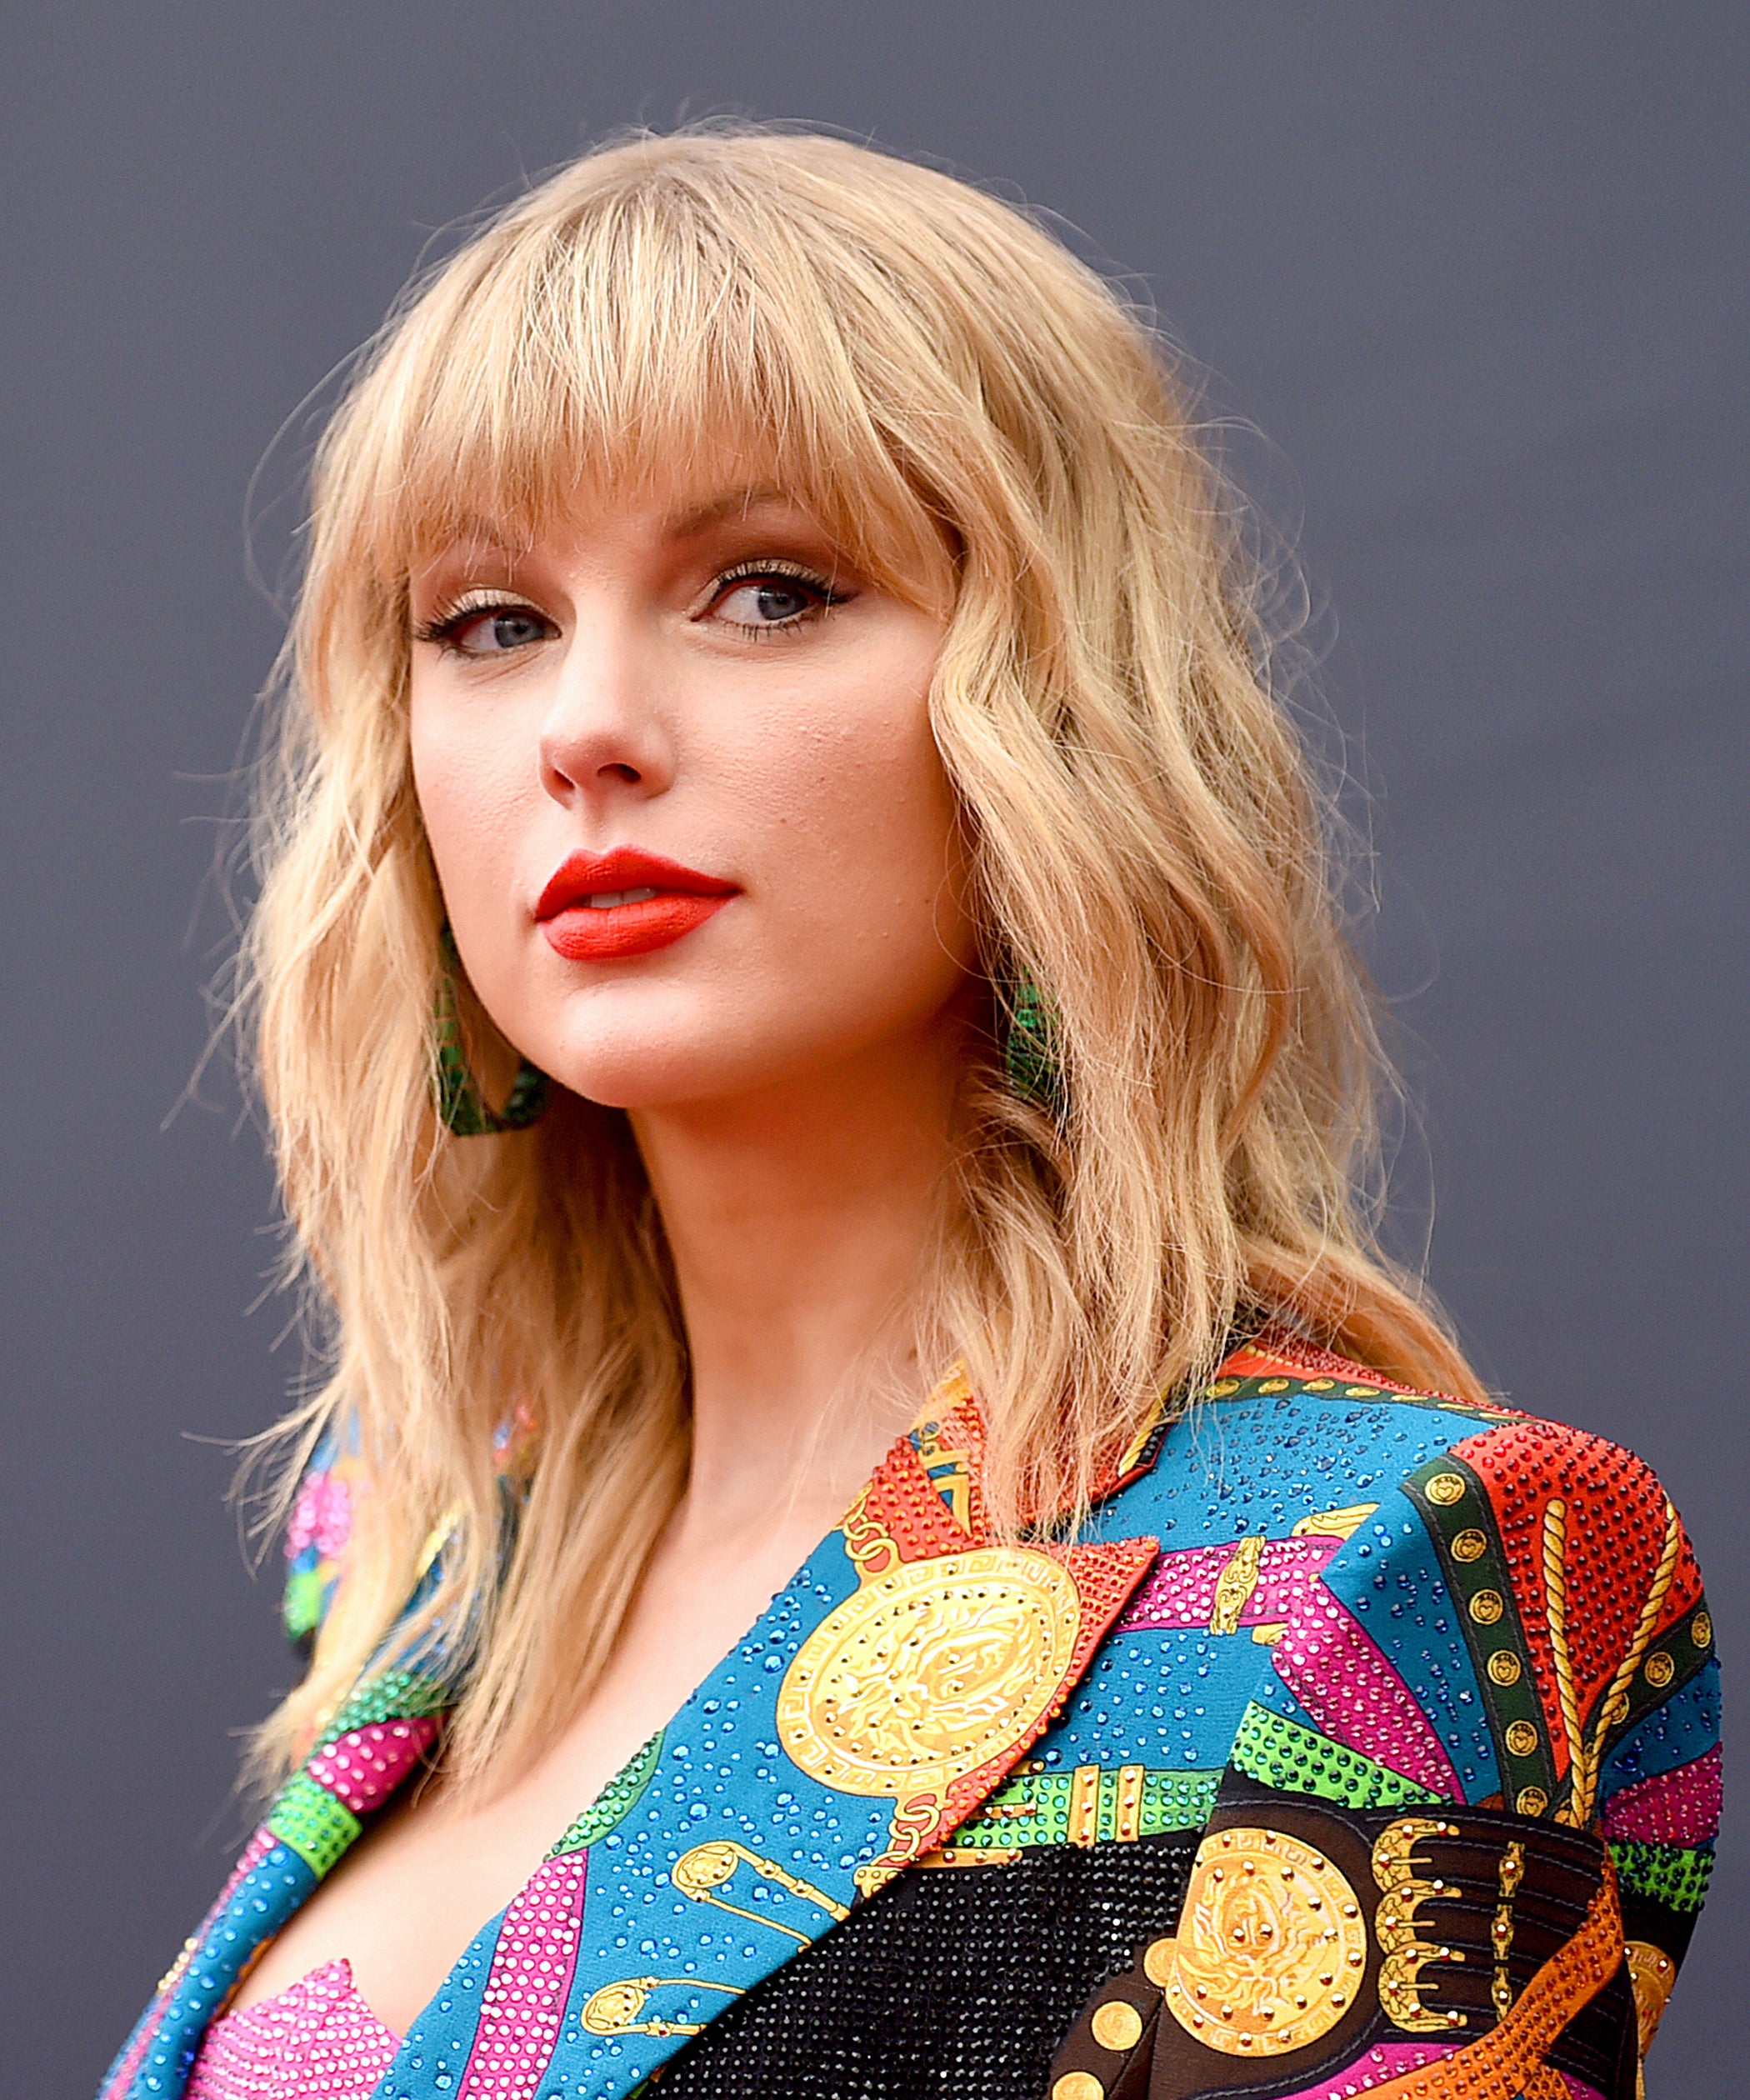 Taylor Swift Sparks Fly chords